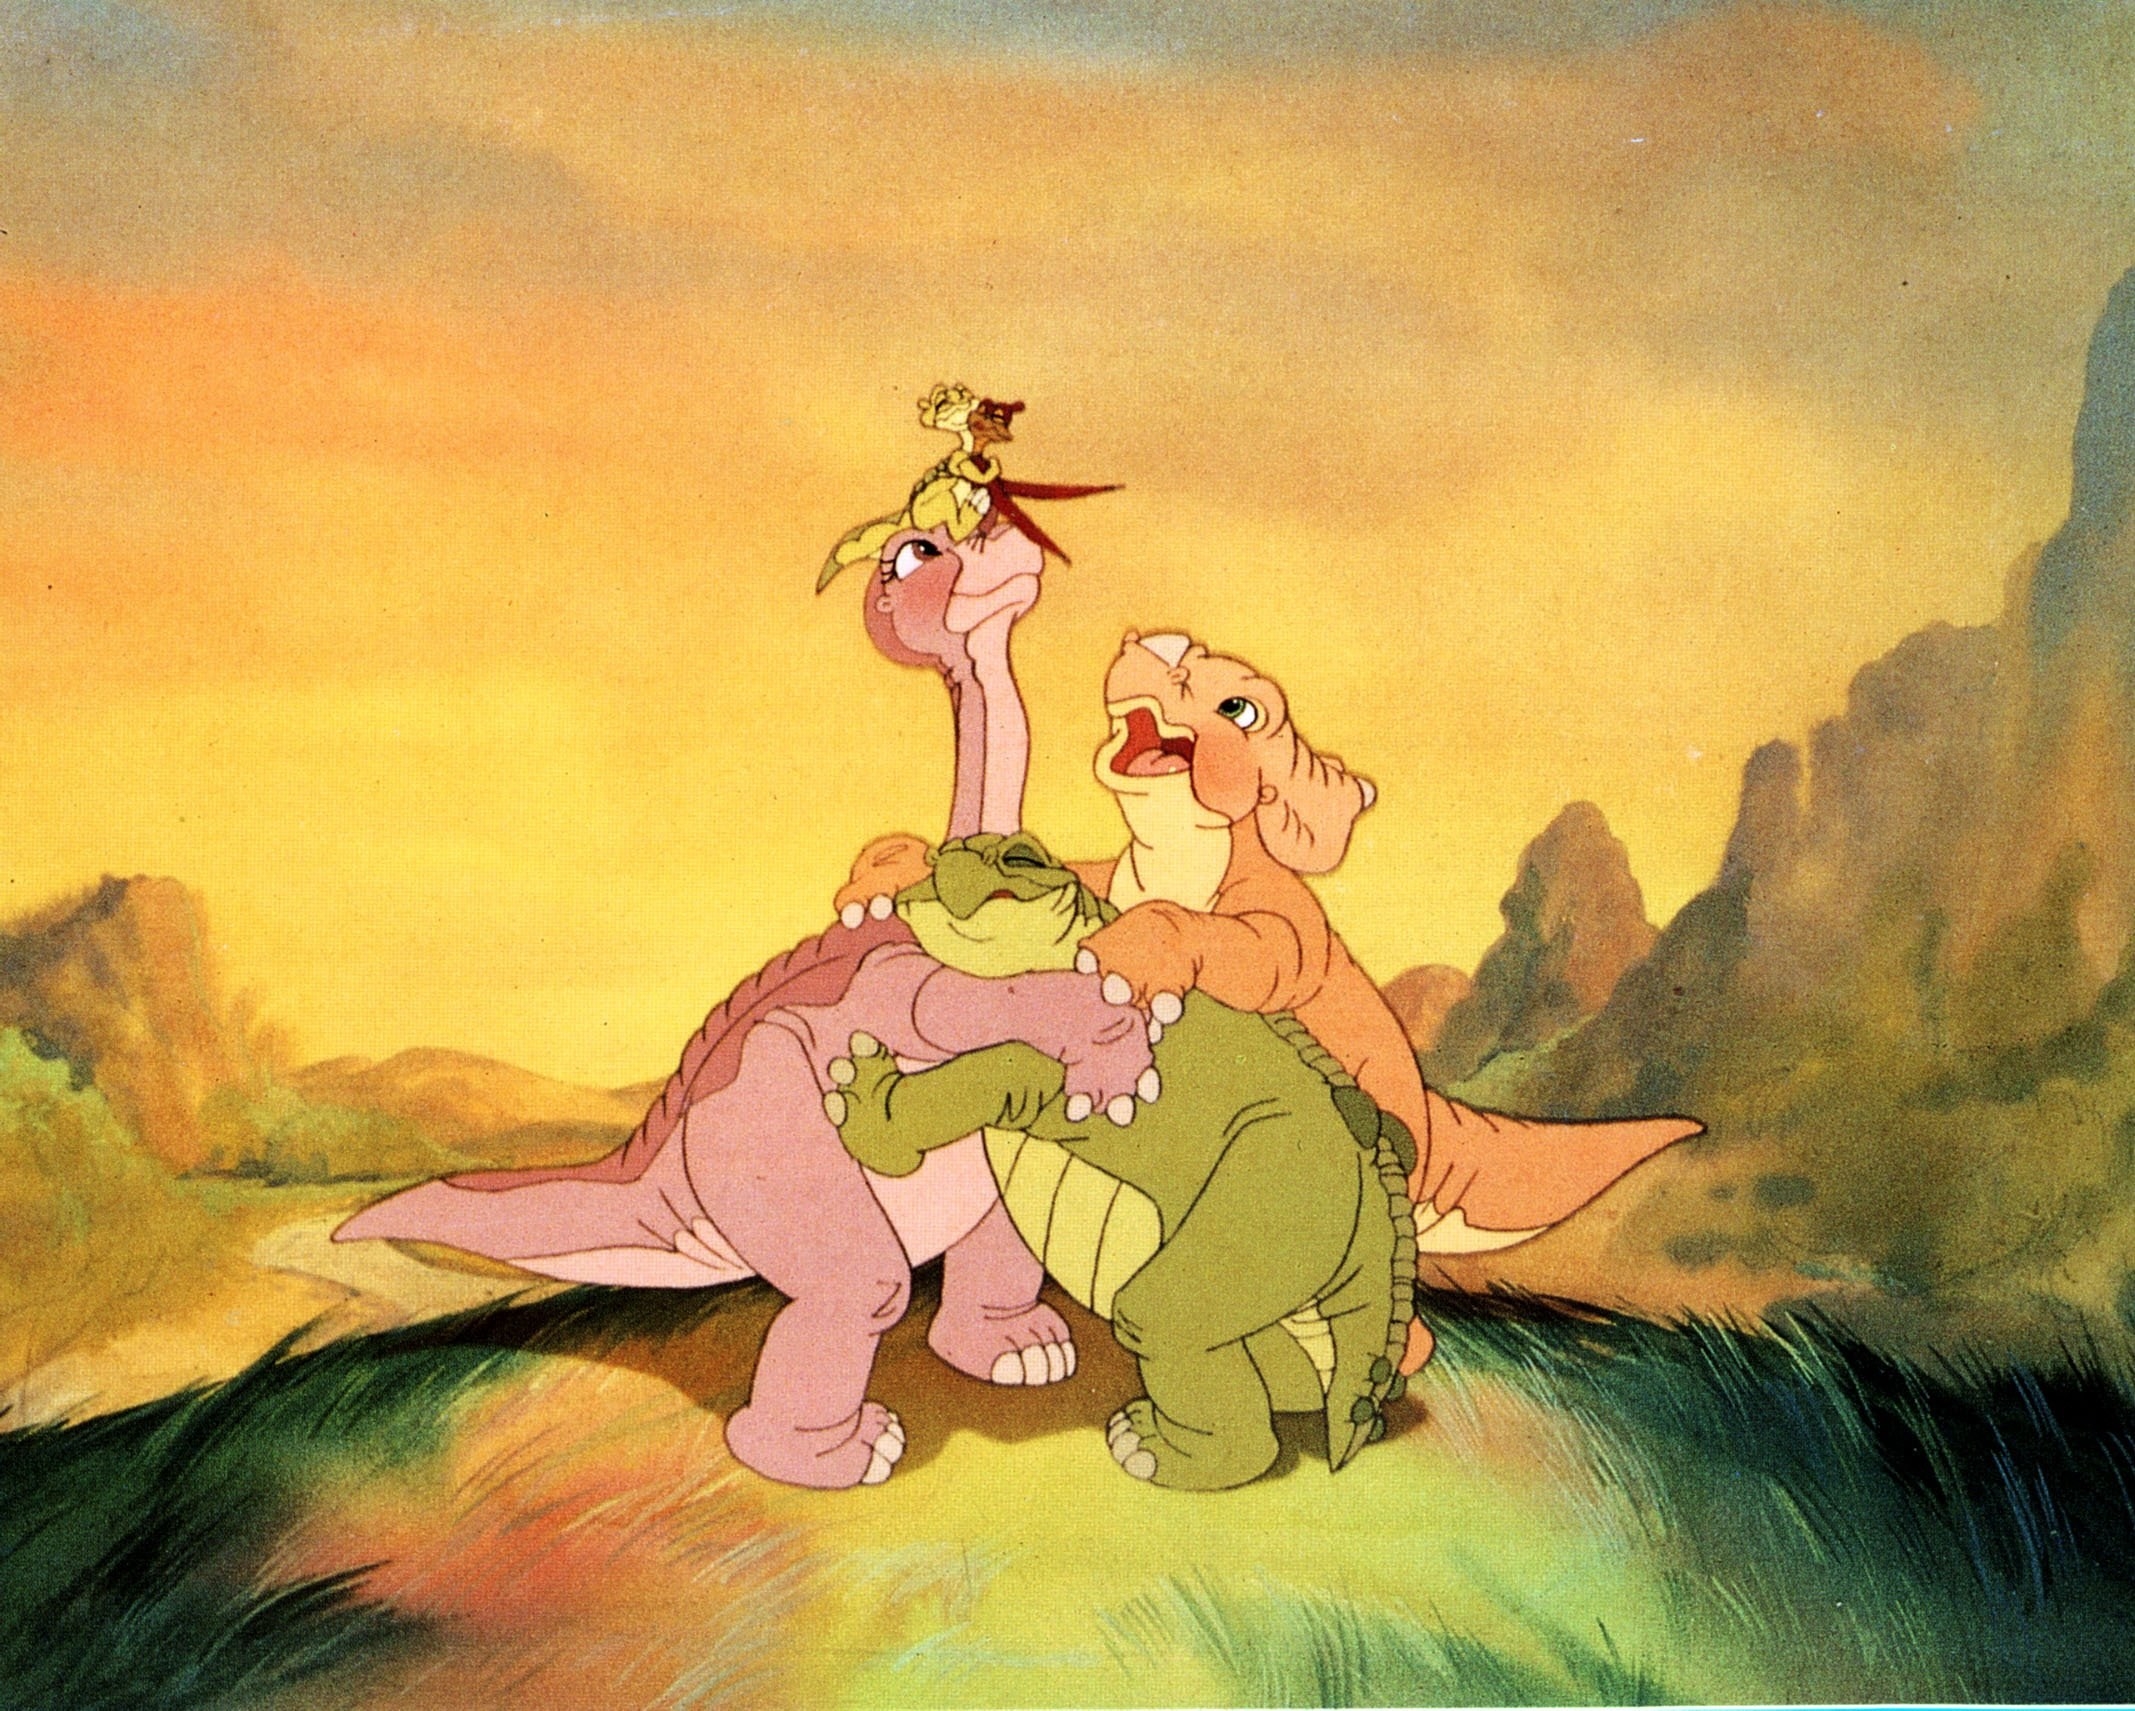 The dinosaur friends from &quot;The Land Before Time&quot; have a group hug